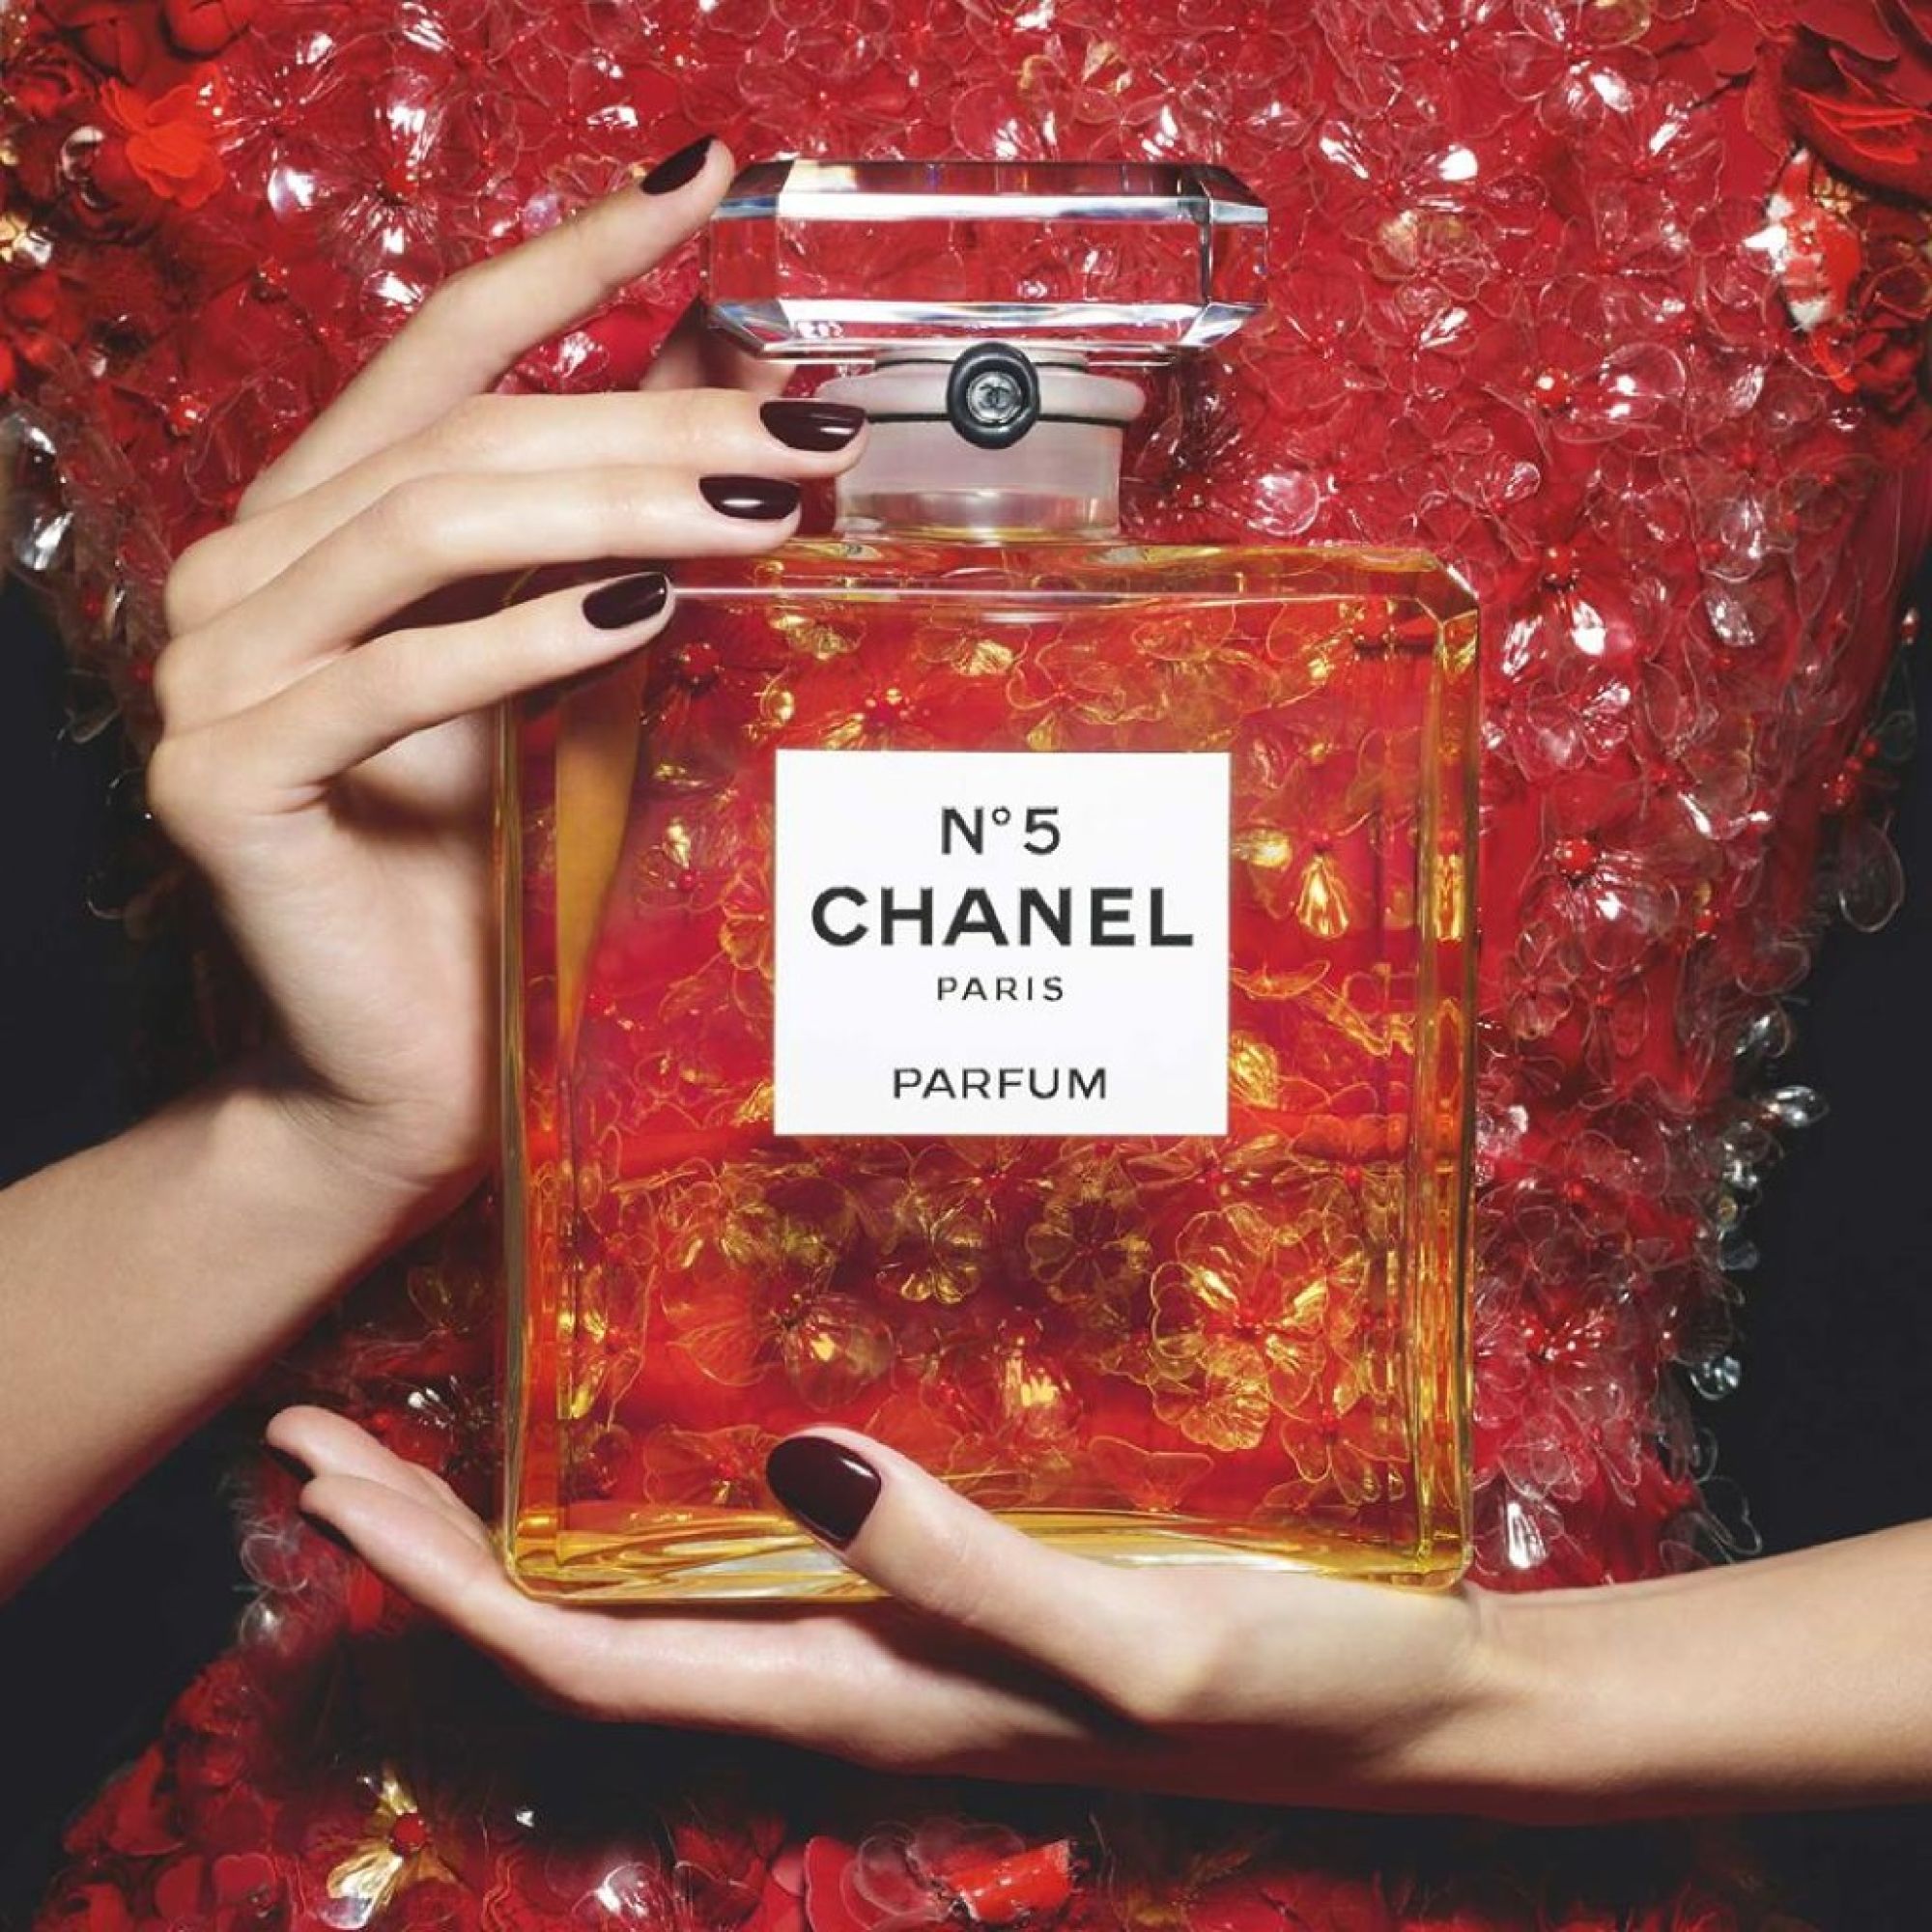 Meet the Wertheimers, the secretive brothers behind Chanel: known as ...